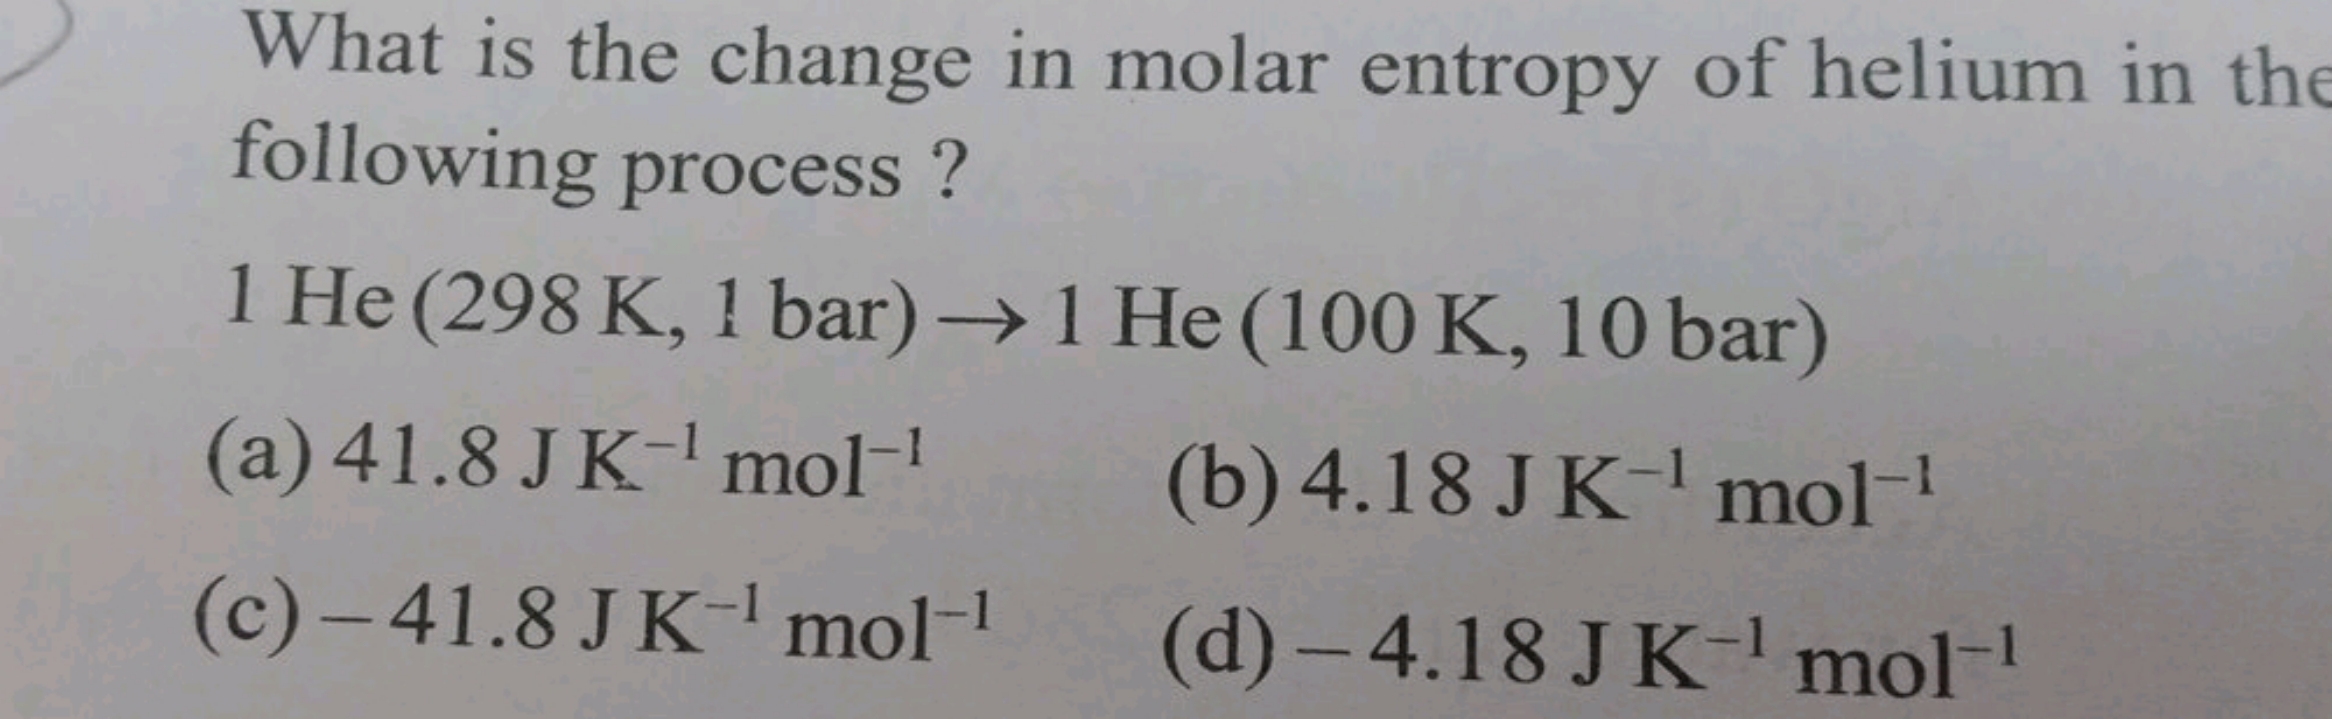 What is the change in molar entropy of helium in the following process